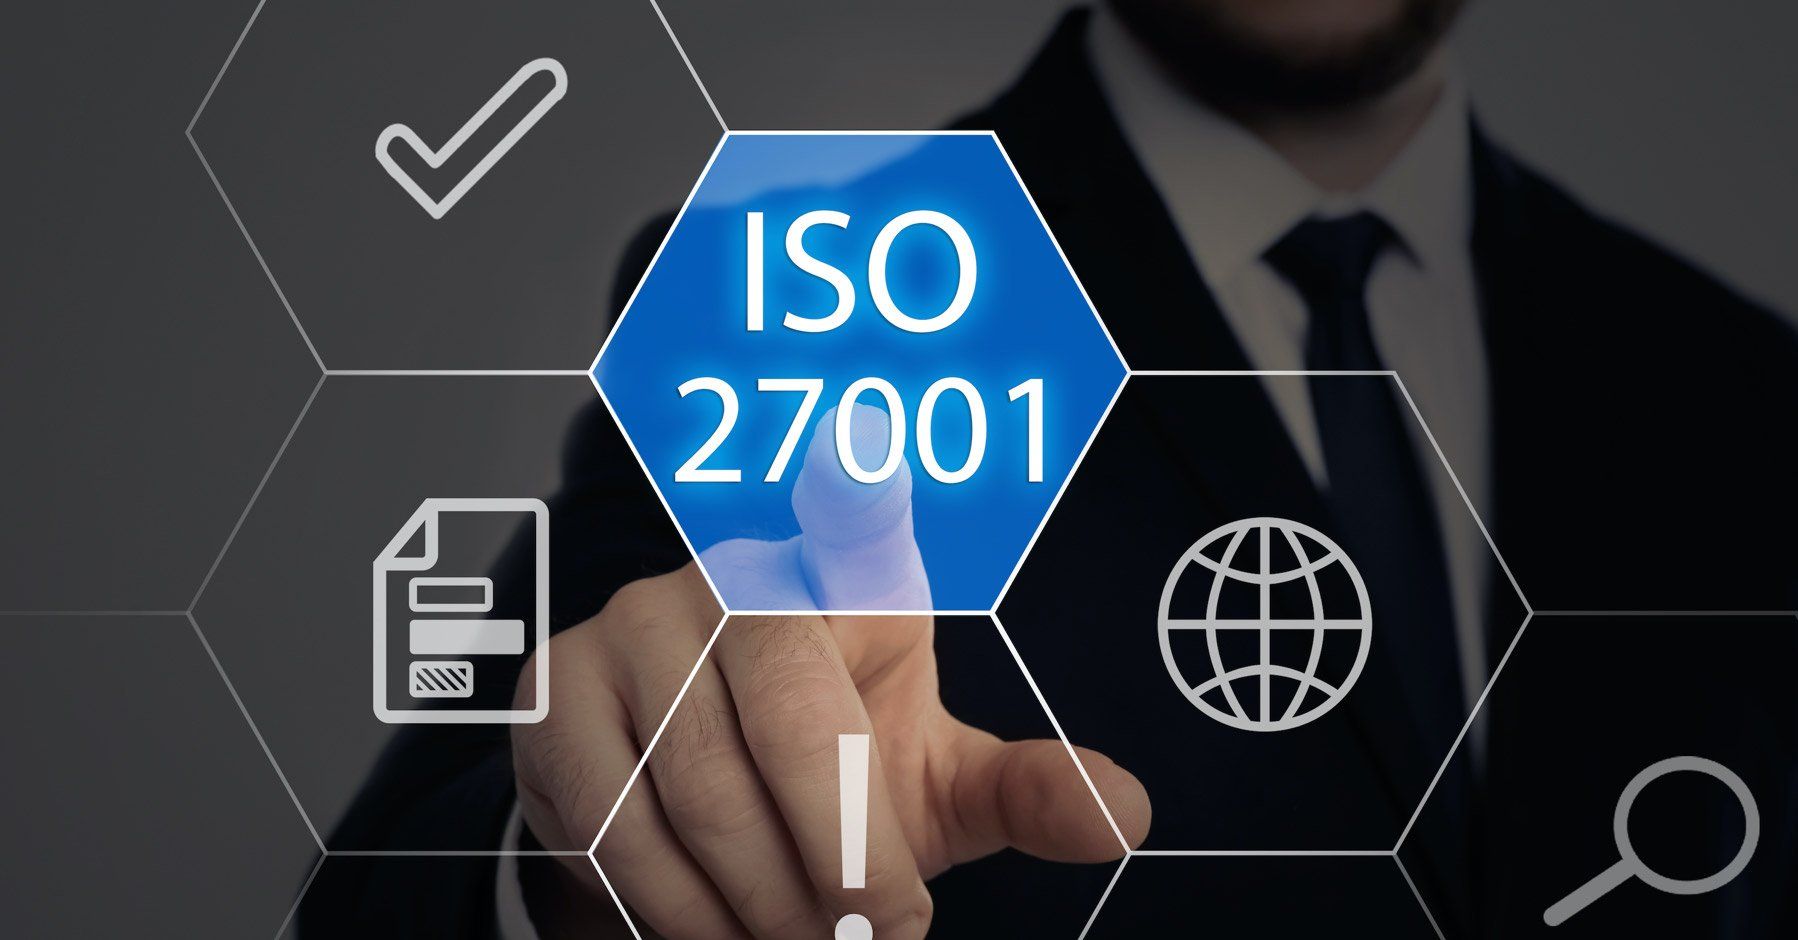 The ISO 27001 certification at COViS